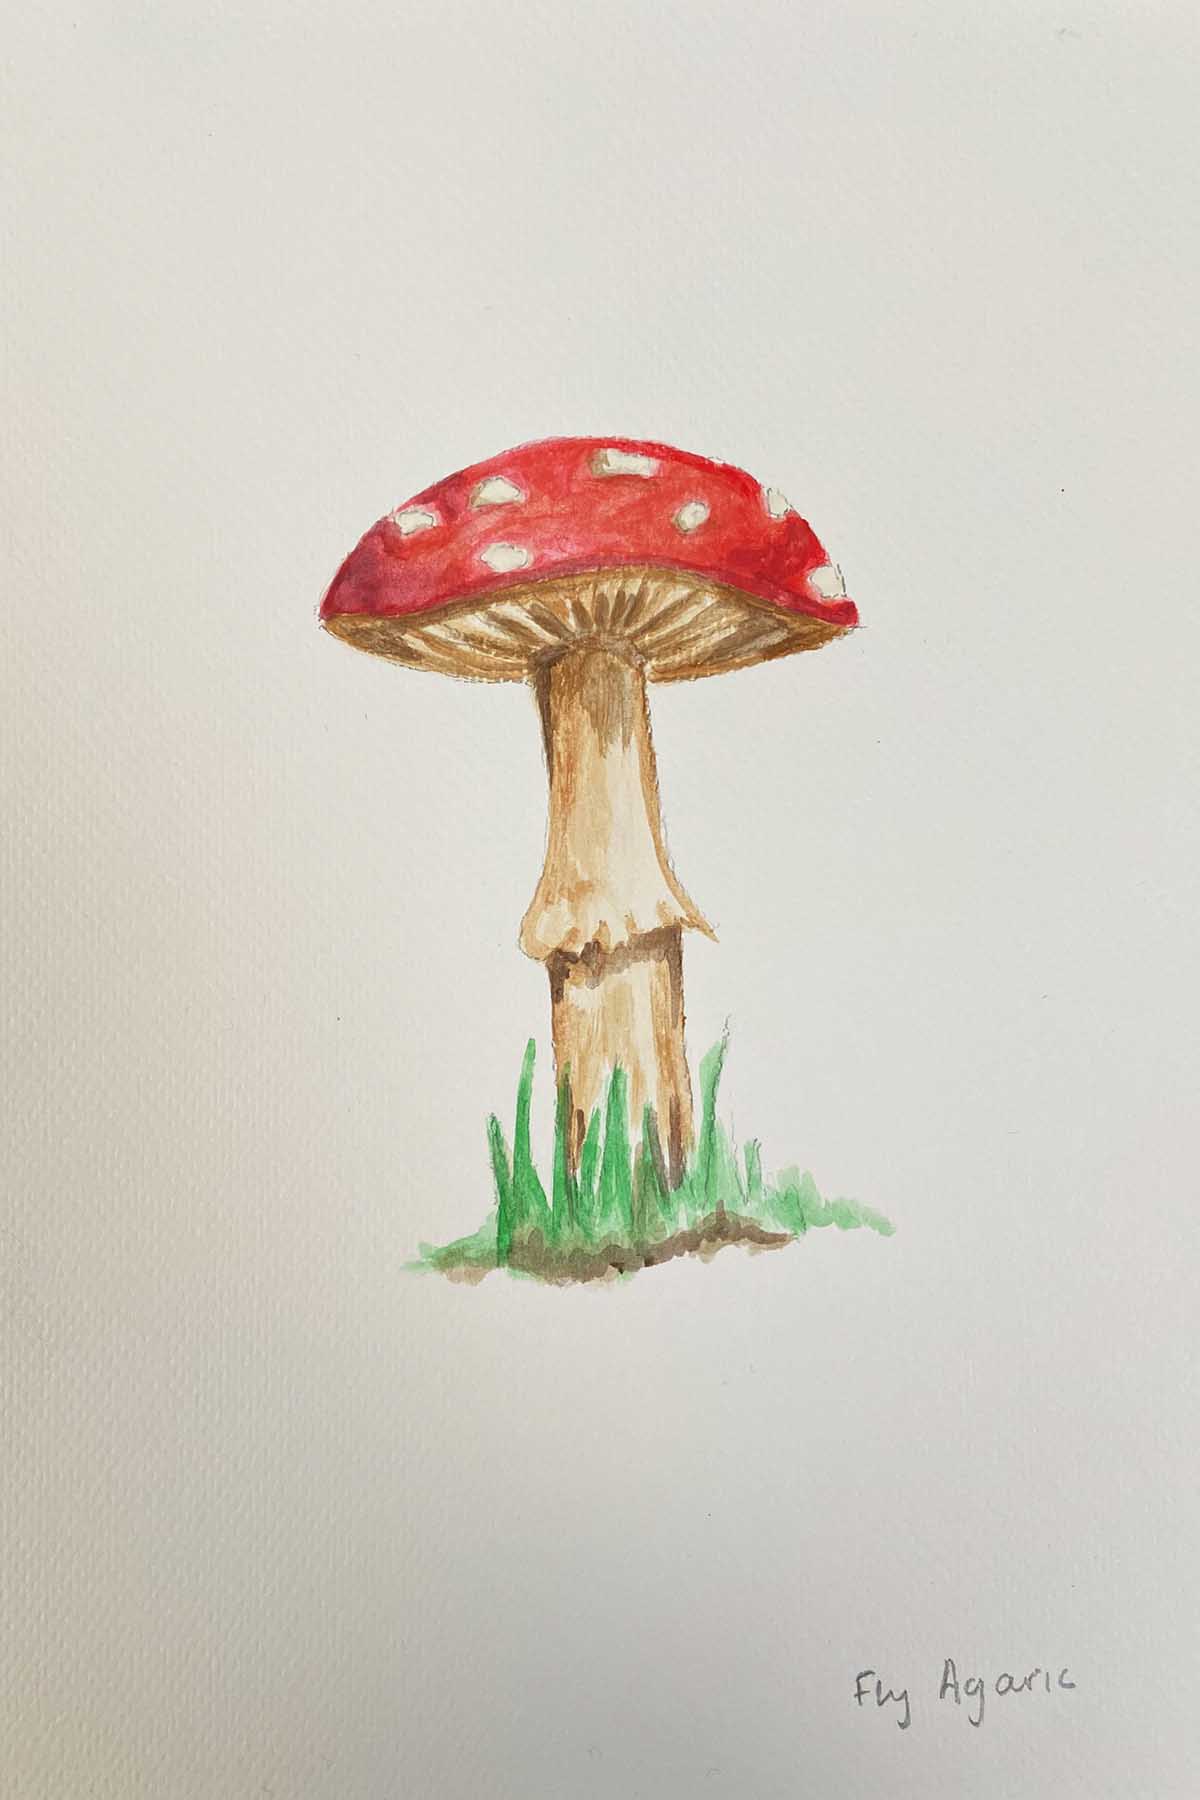 Finished drawn and painted fly agaric mushroom